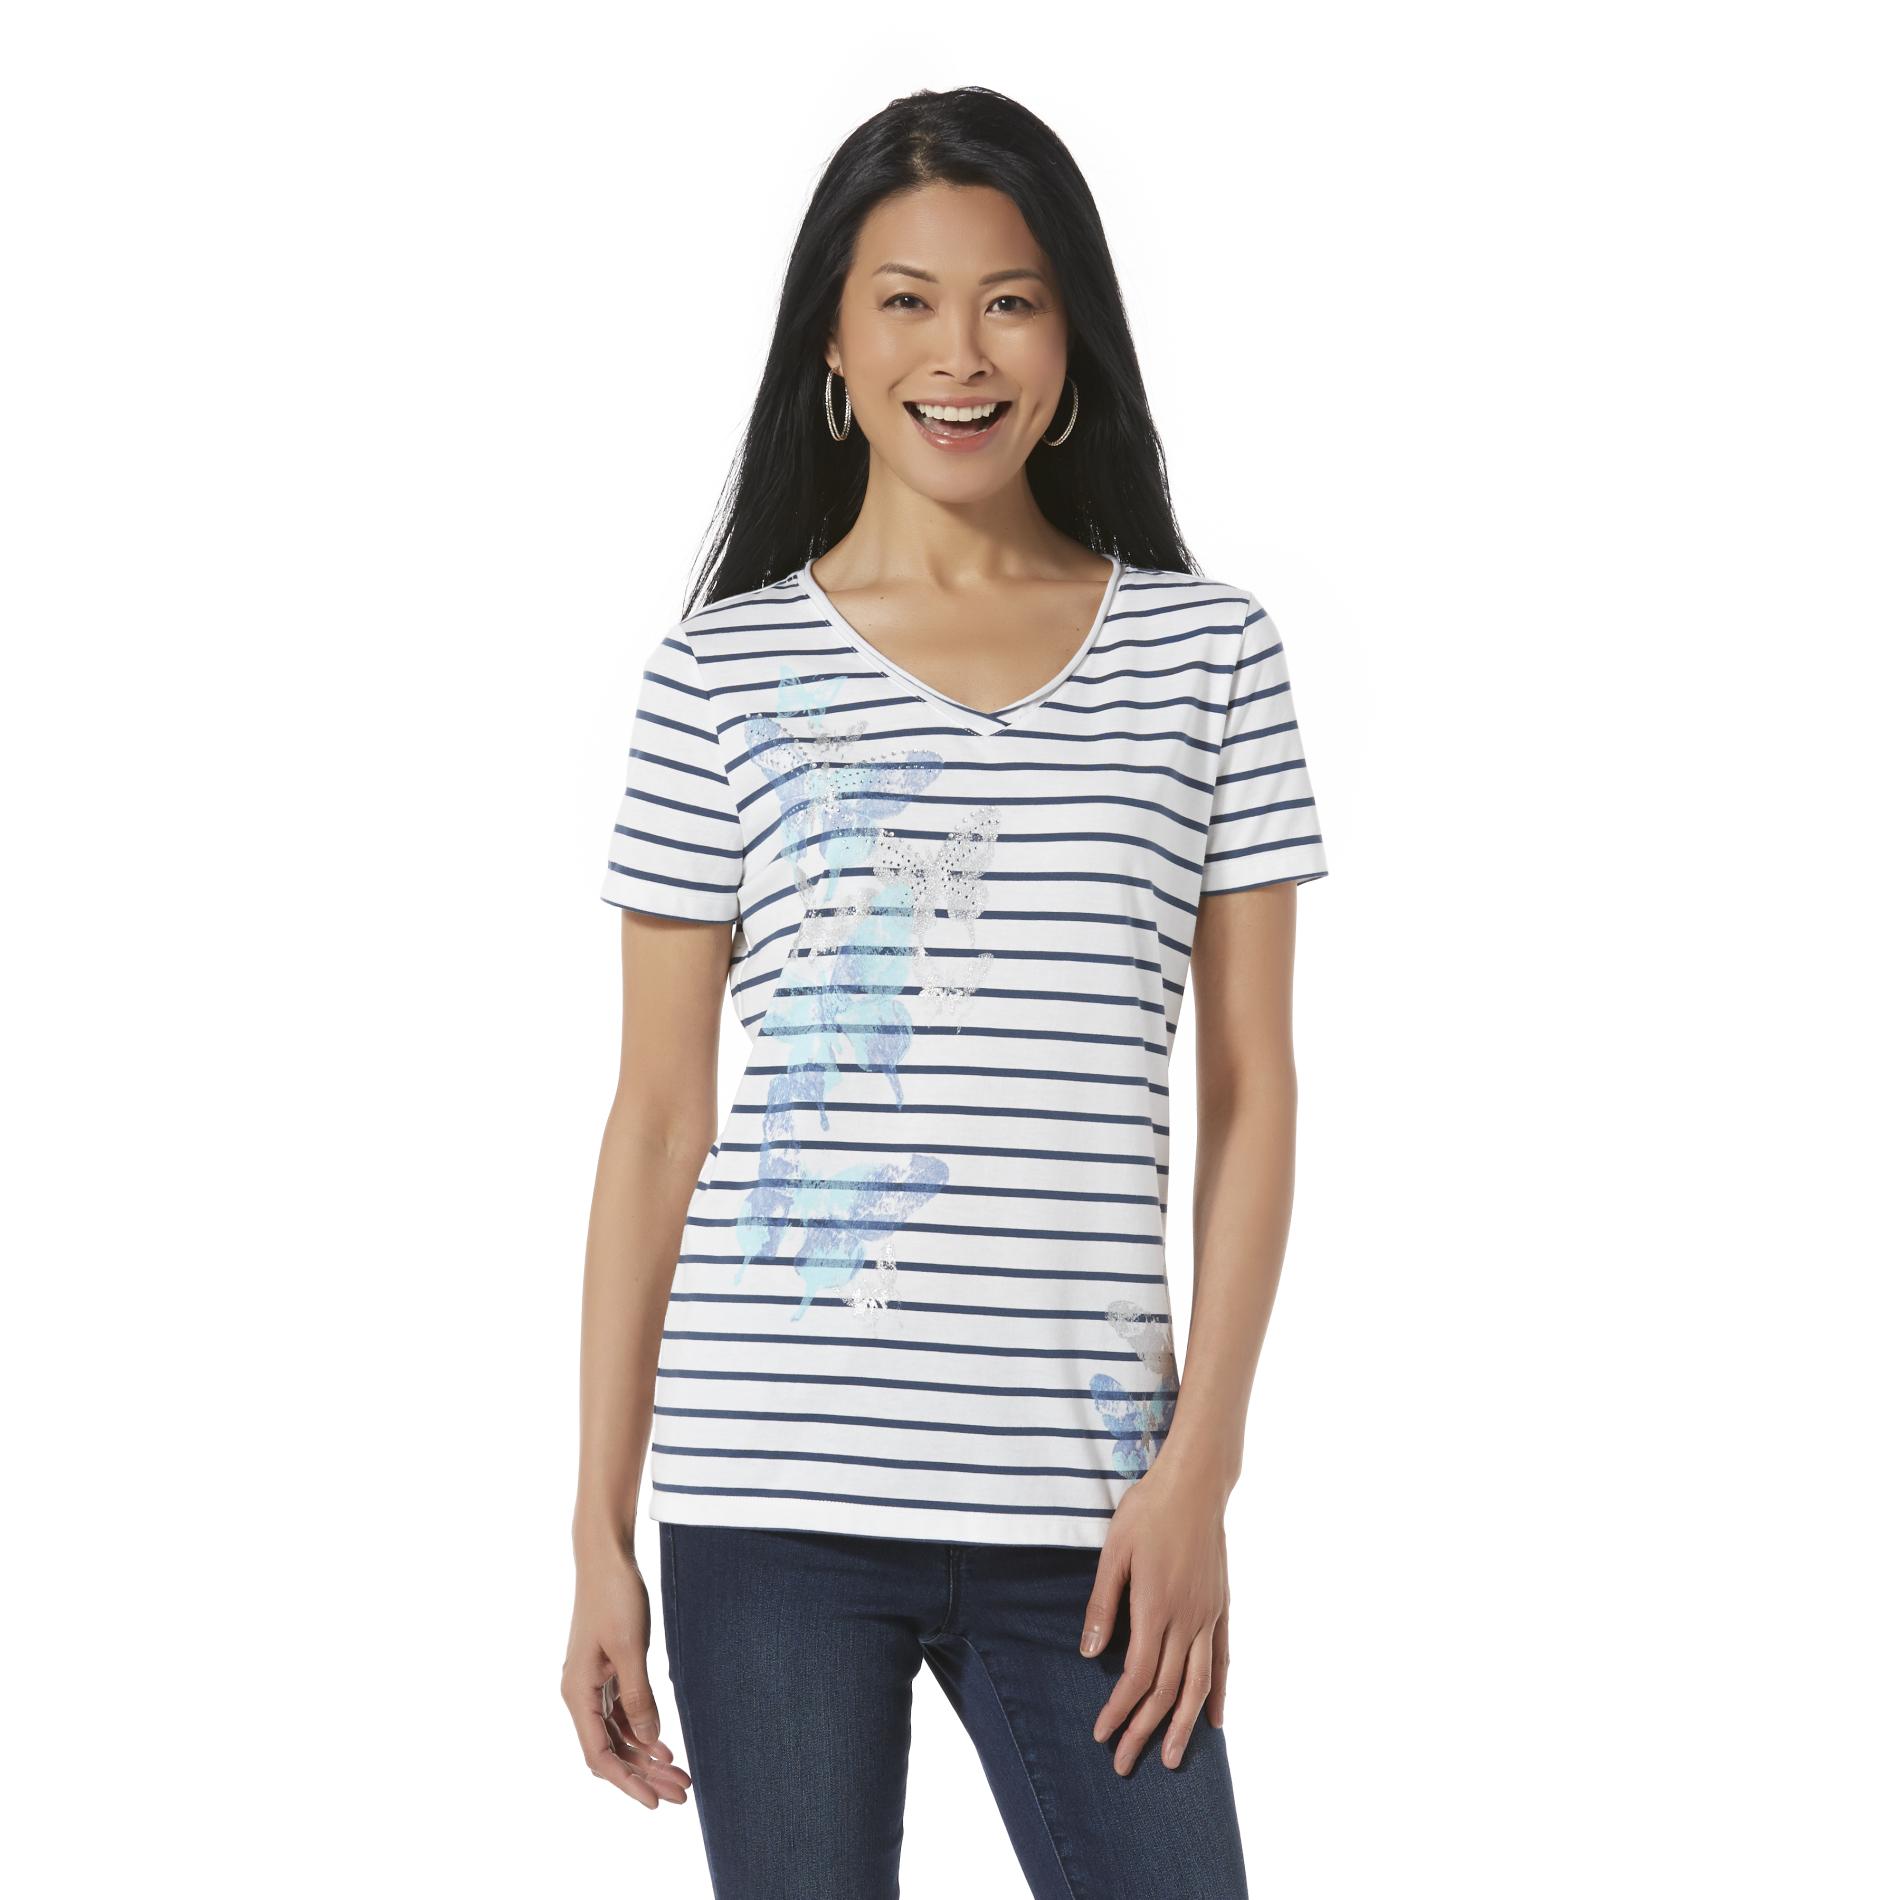 Women's Embellished Top - Striped